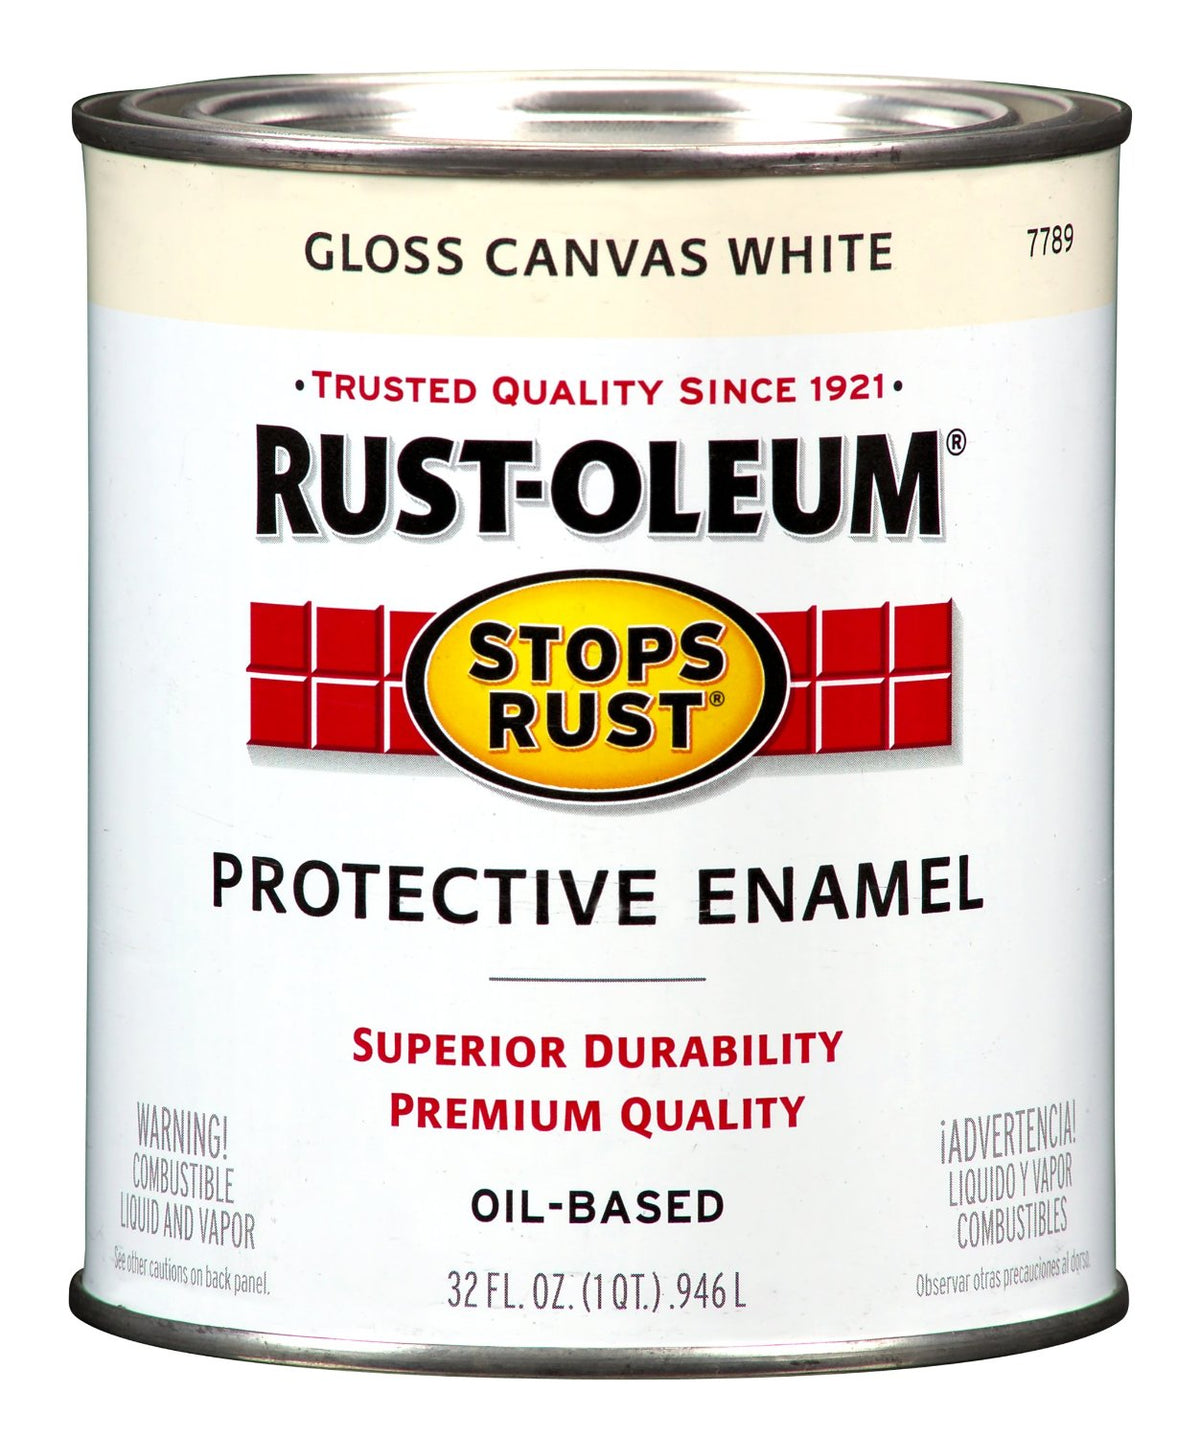 buy rust preventative spray paint at cheap rate in bulk. wholesale & retail home painting goods store. home décor ideas, maintenance, repair replacement parts